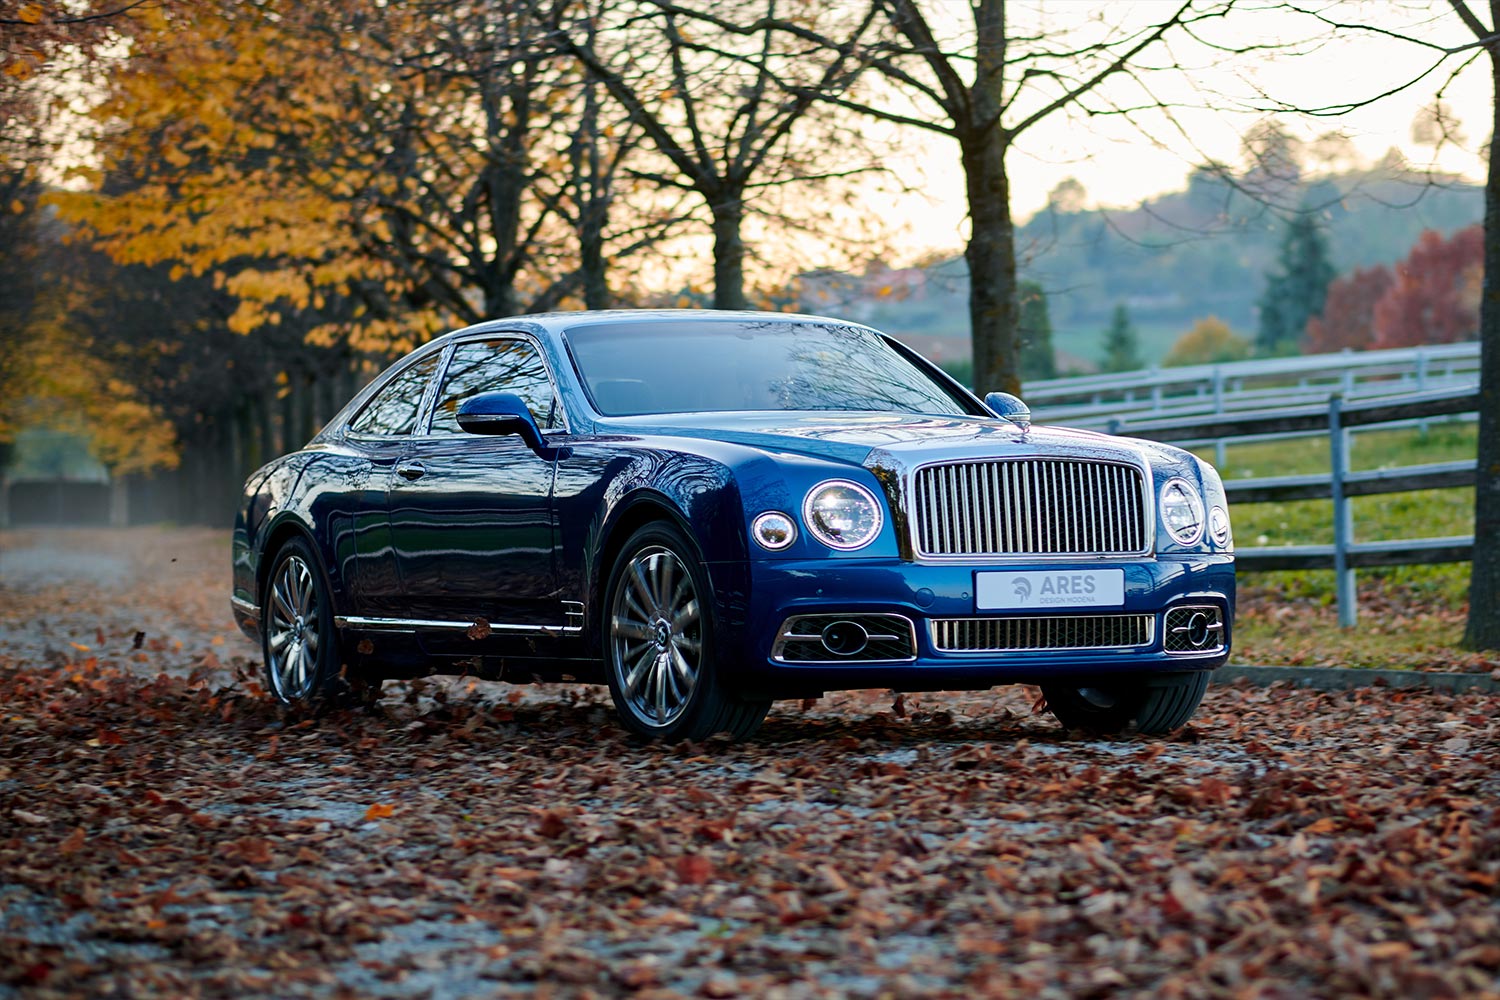 This Bentley Mulsanne was converted from a four-door into a two-door by Ares.